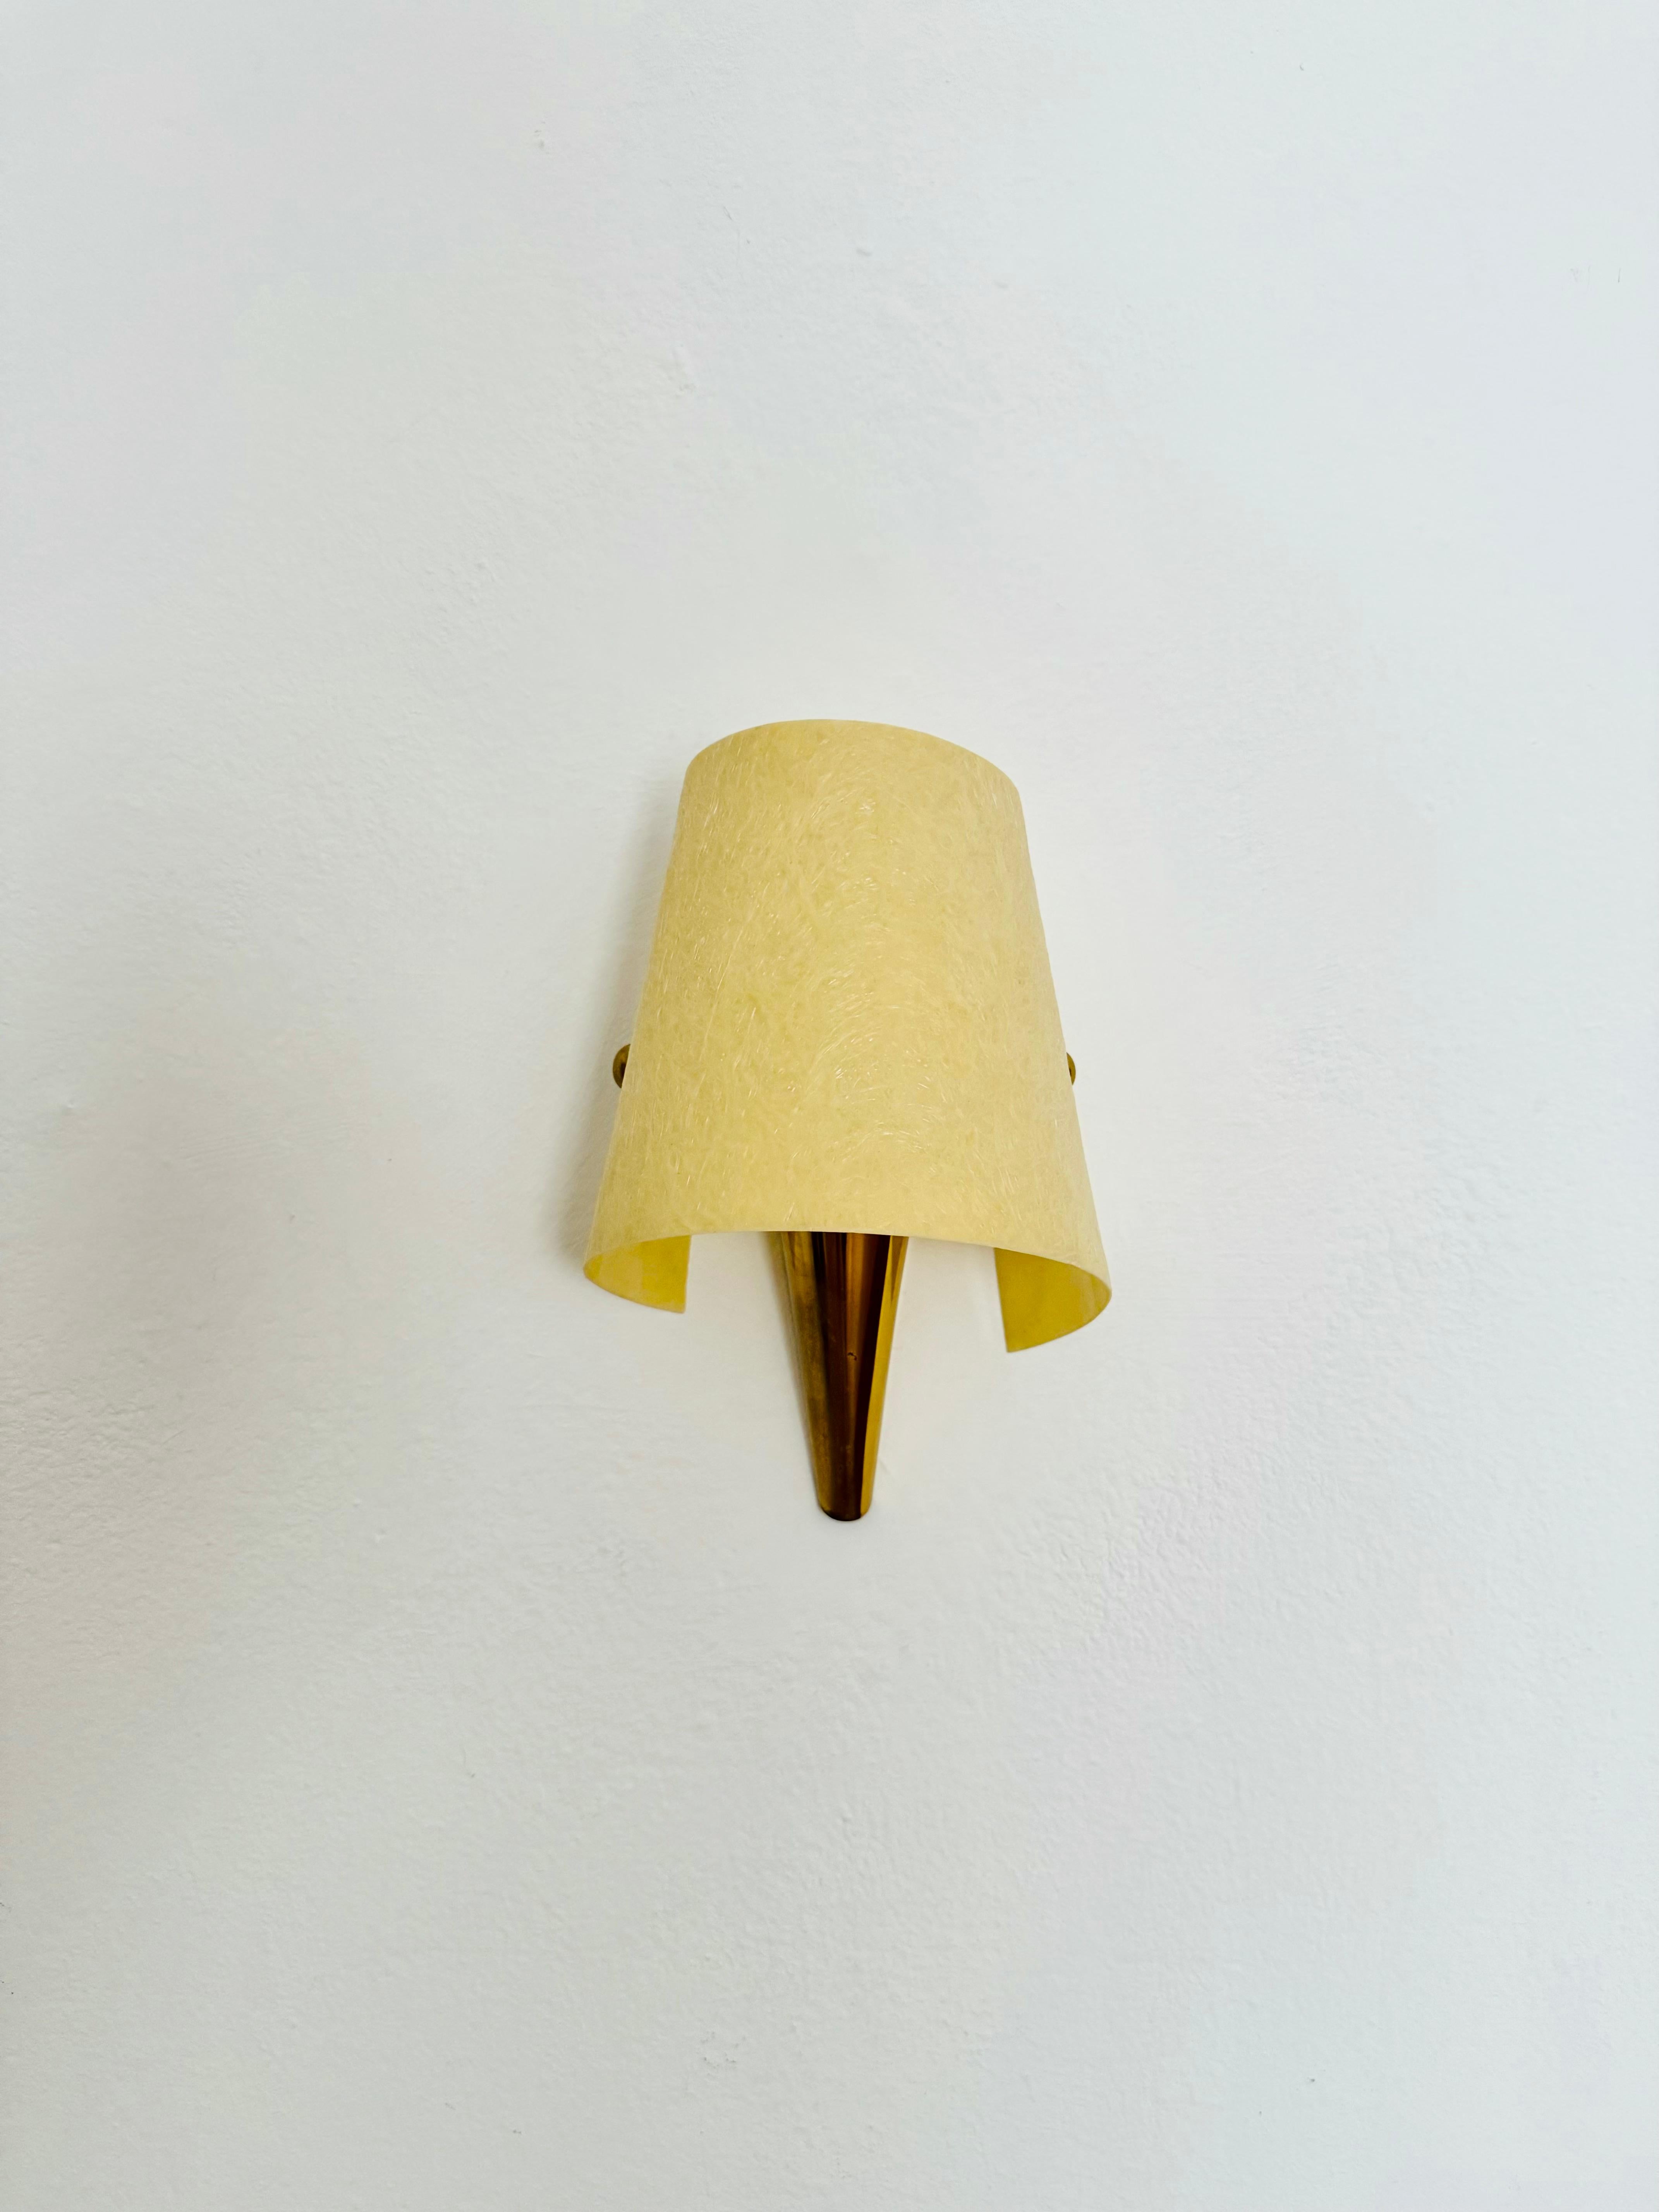 Beautiful small brass wall lamps from the 50s.
Loving design and high-quality workmanship.
The fiberglass lampshade creates a cozy light.

The pictures are part of the description.

I'm happy to help if you have any questions.

Condition:

Very good